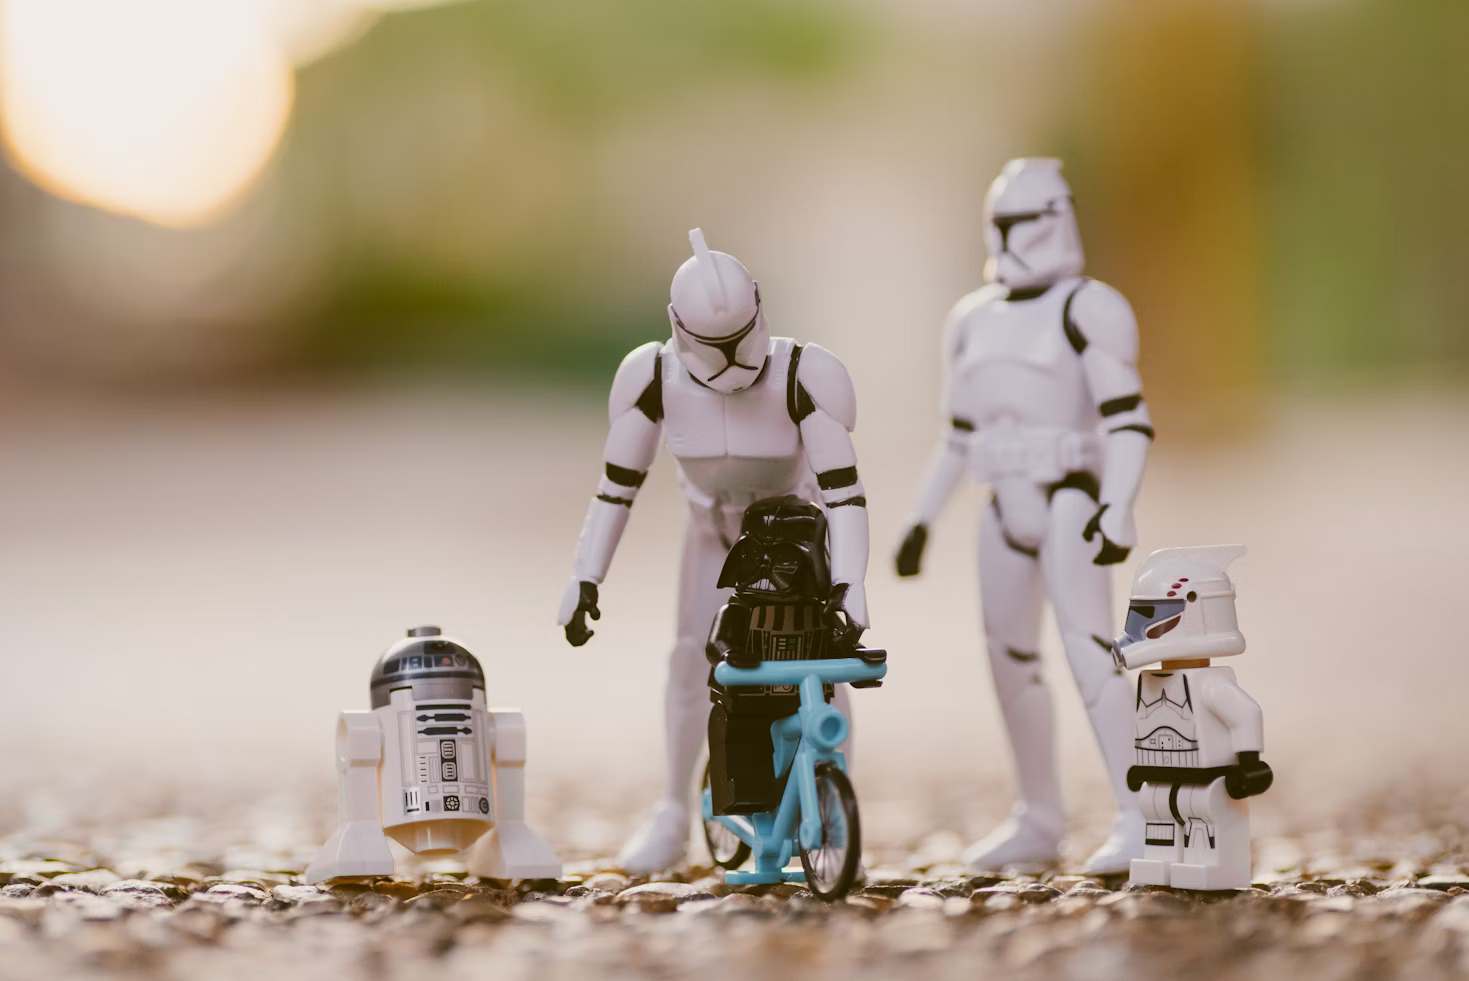 Selective focus photography of star wars stormtropper r2 d2 and darth vader toys